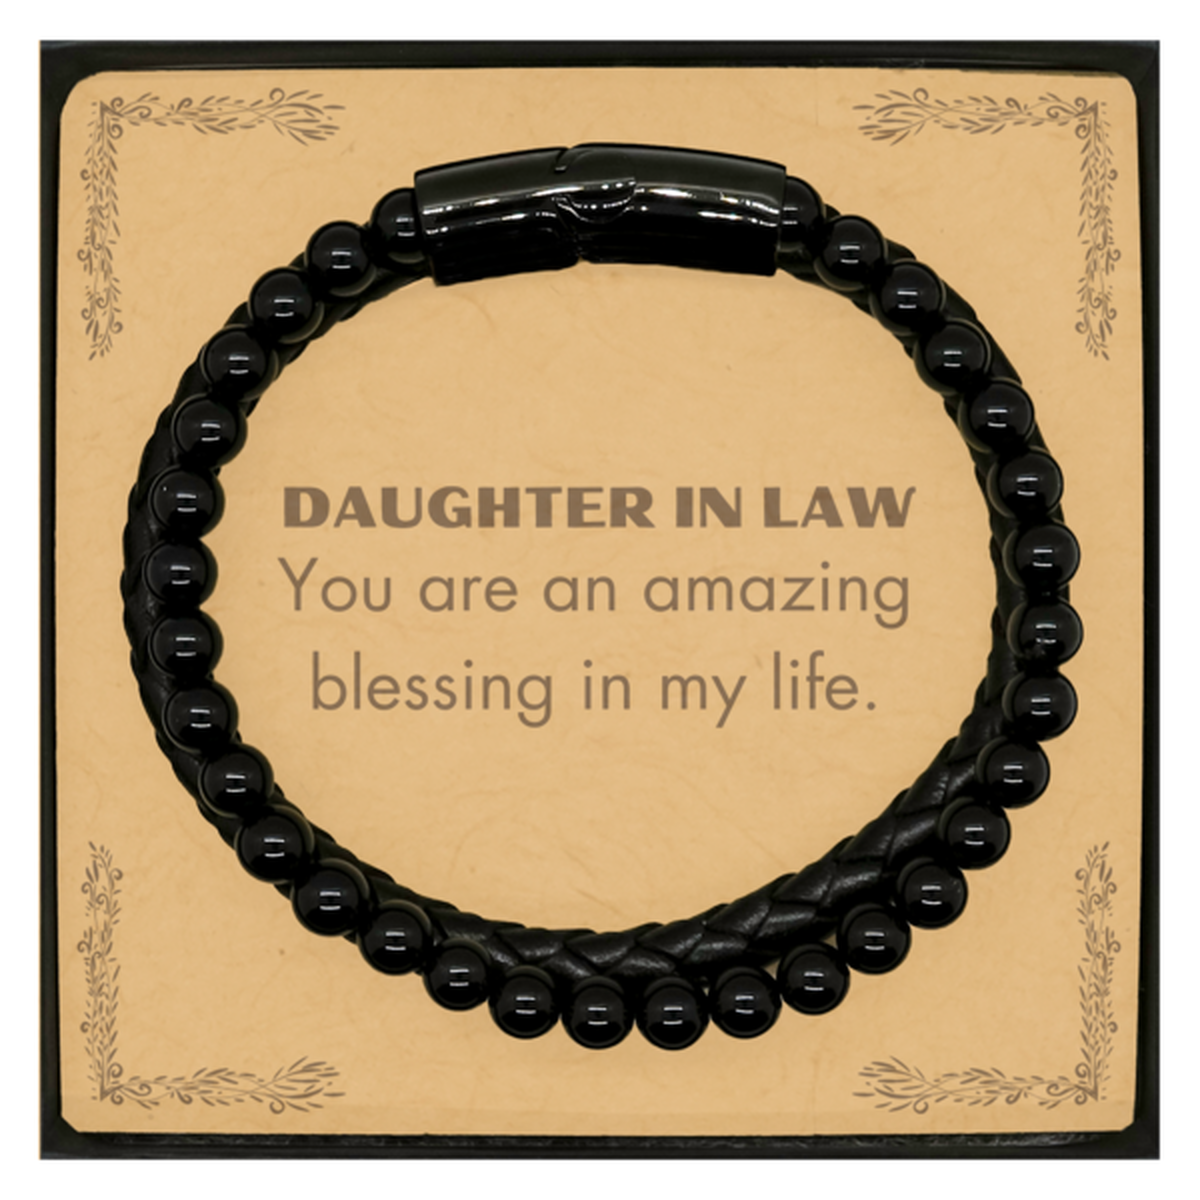 Daughter In Law Stone Leather Bracelets, You are an amazing blessing in my life, Thank You Gifts For Daughter In Law, Inspirational Birthday Christmas Unique Gifts For Daughter In Law